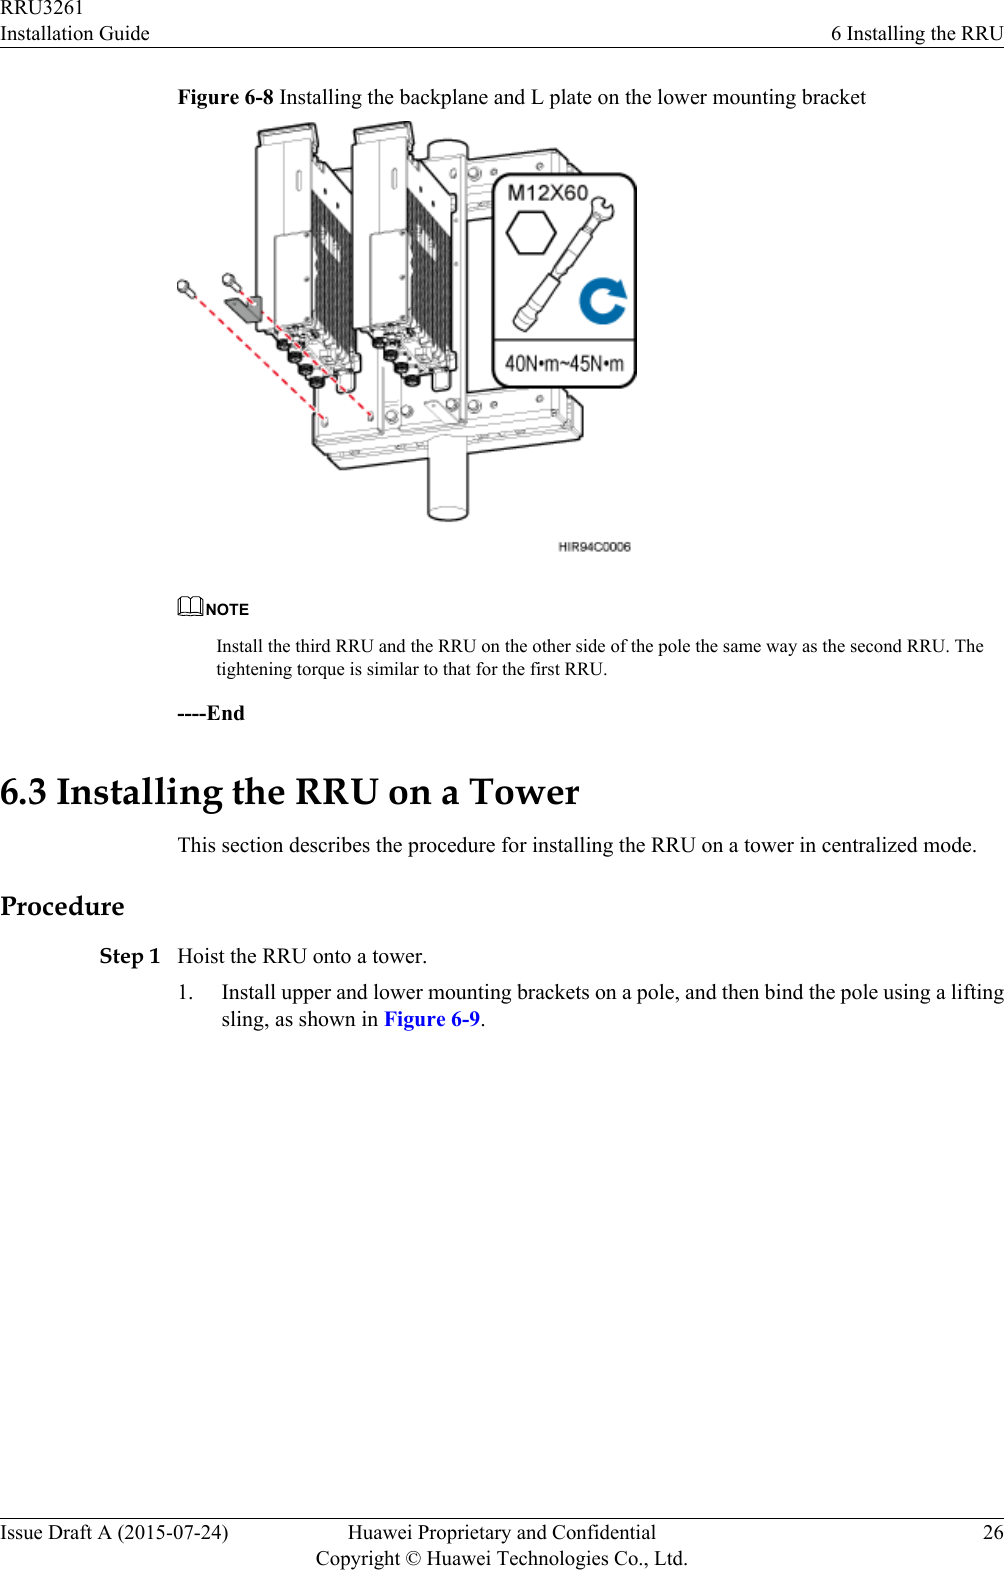 Figure 6-8 Installing the backplane and L plate on the lower mounting bracketNOTEInstall the third RRU and the RRU on the other side of the pole the same way as the second RRU. Thetightening torque is similar to that for the first RRU.----End6.3 Installing the RRU on a TowerThis section describes the procedure for installing the RRU on a tower in centralized mode.ProcedureStep 1 Hoist the RRU onto a tower.1. Install upper and lower mounting brackets on a pole, and then bind the pole using a liftingsling, as shown in Figure 6-9.RRU3261Installation Guide 6 Installing the RRUIssue Draft A (2015-07-24) Huawei Proprietary and ConfidentialCopyright © Huawei Technologies Co., Ltd.26